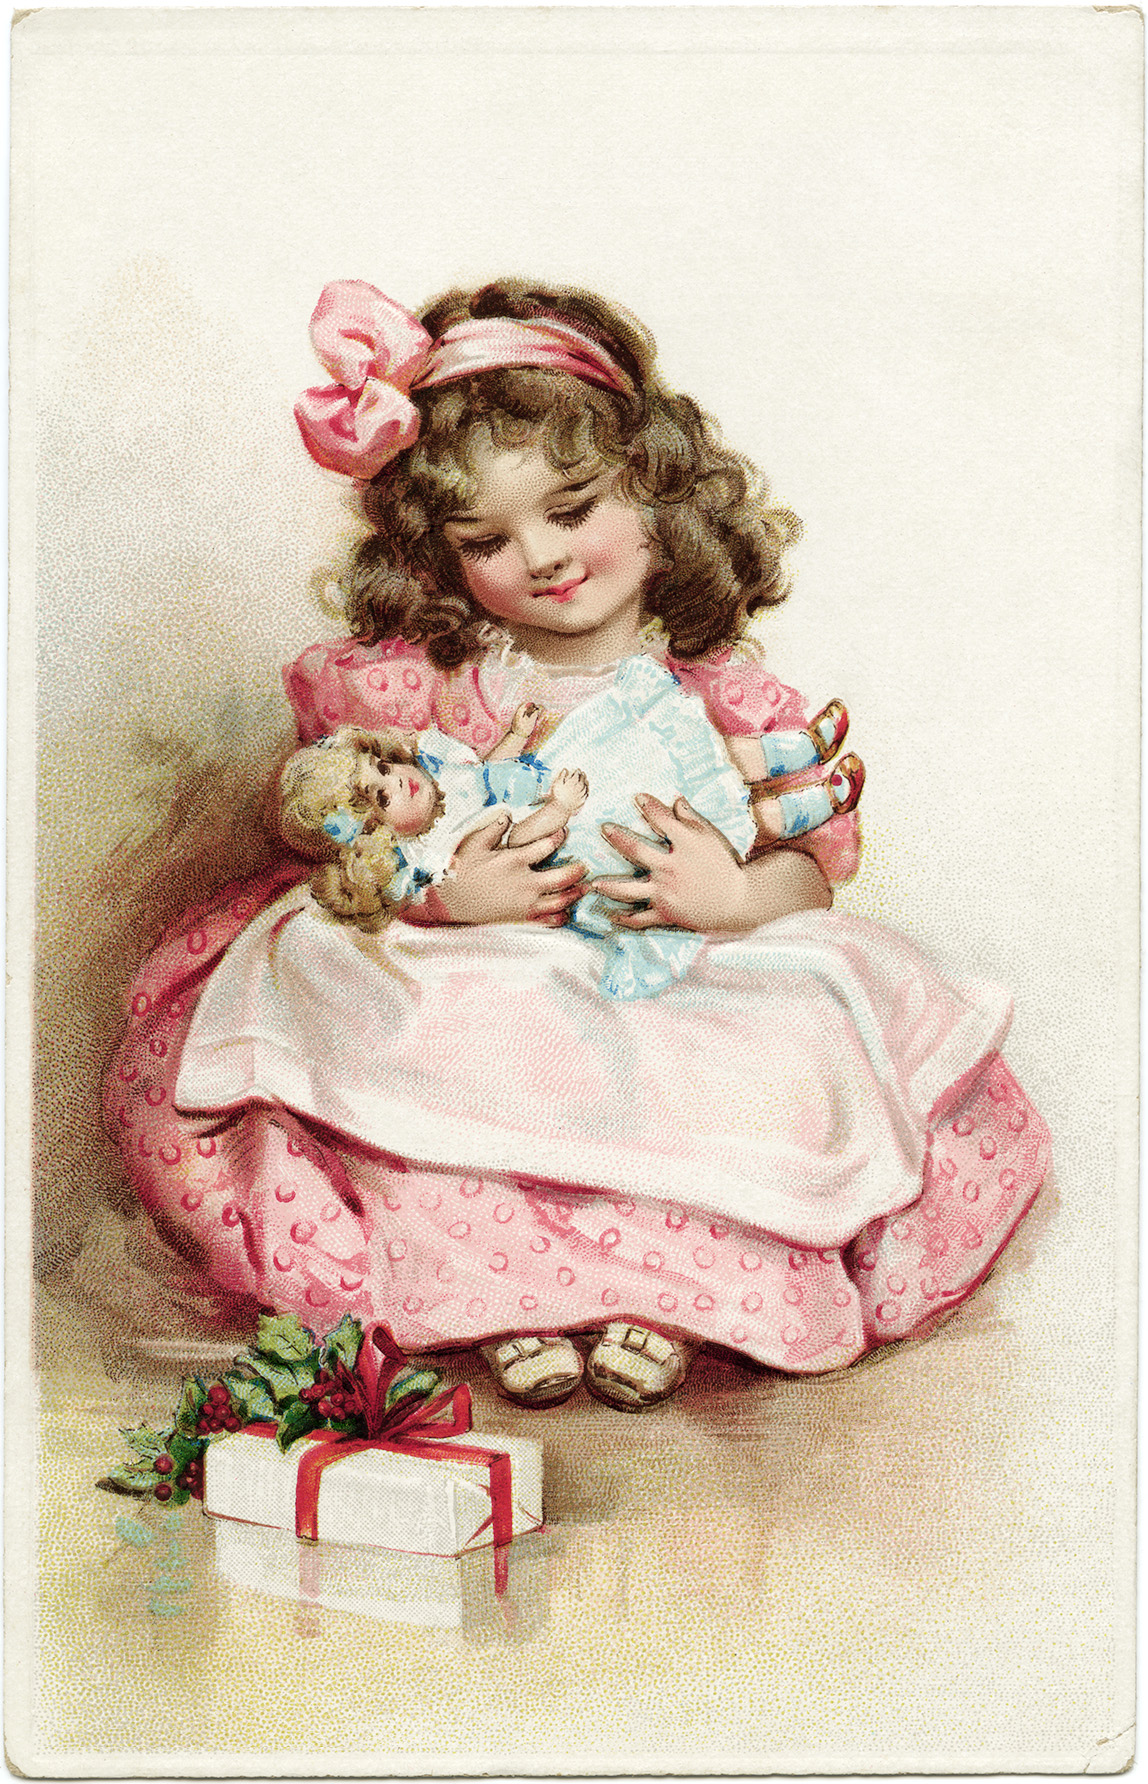 And Doll Clipart Girl Holding Dolly Image Vintage People Clip Art